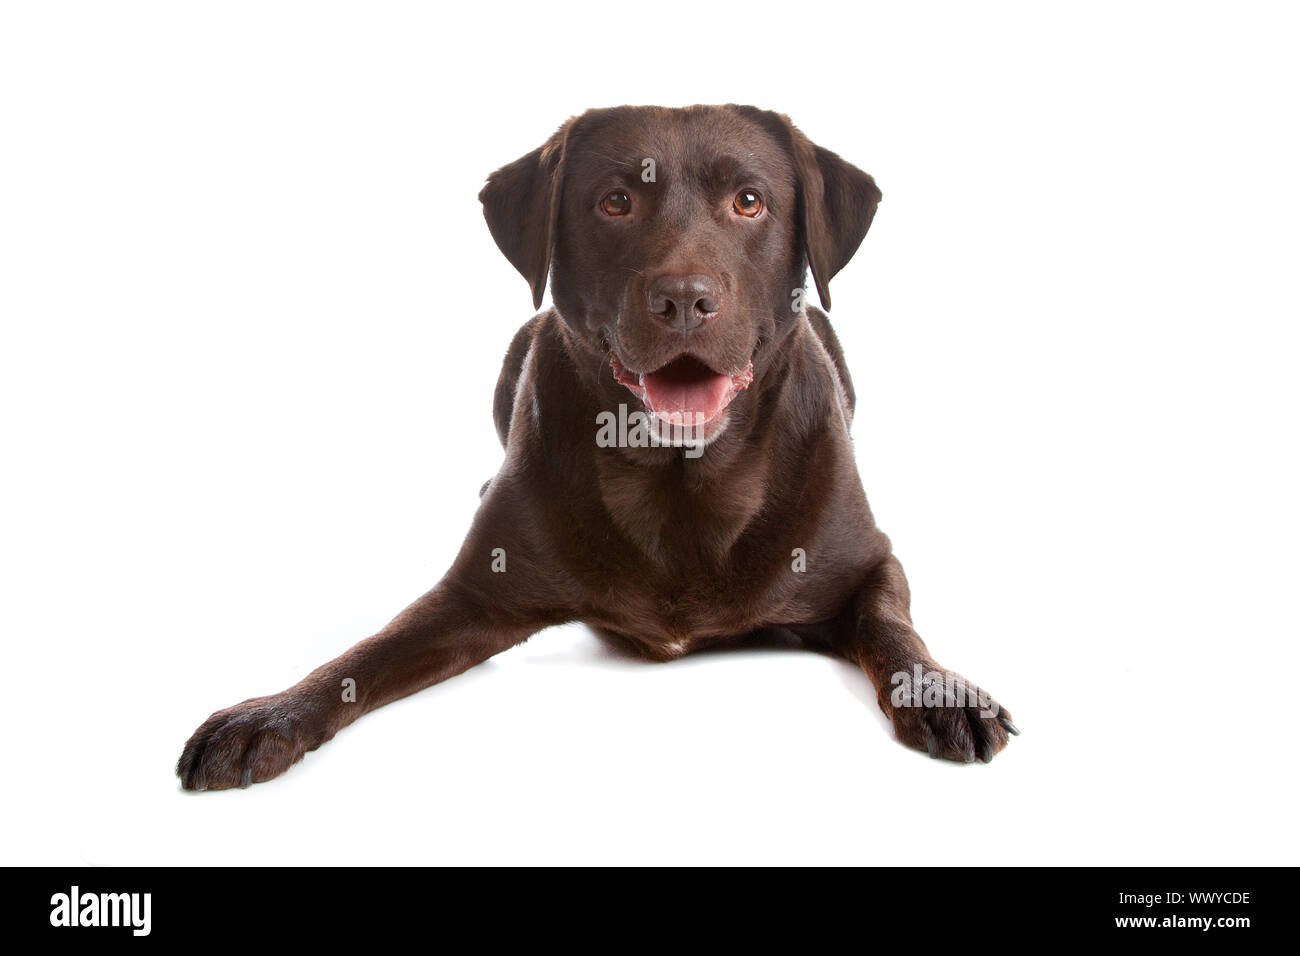 Chocolate Labrador Retriever dog lying down, isolated on a white background Stock Photo